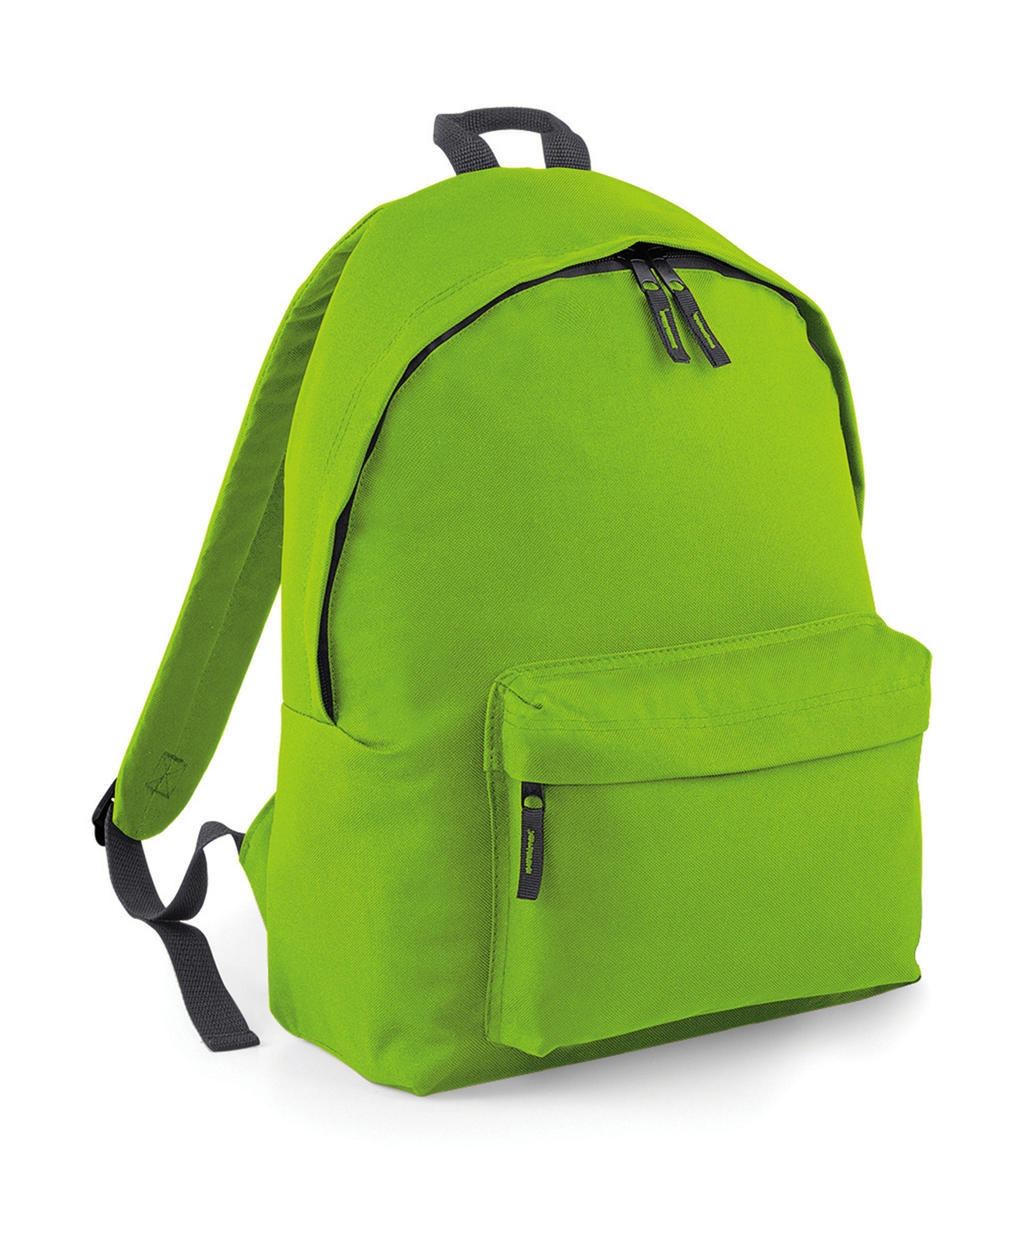 Fashion Backpack Lime/Graphite Grey Vert